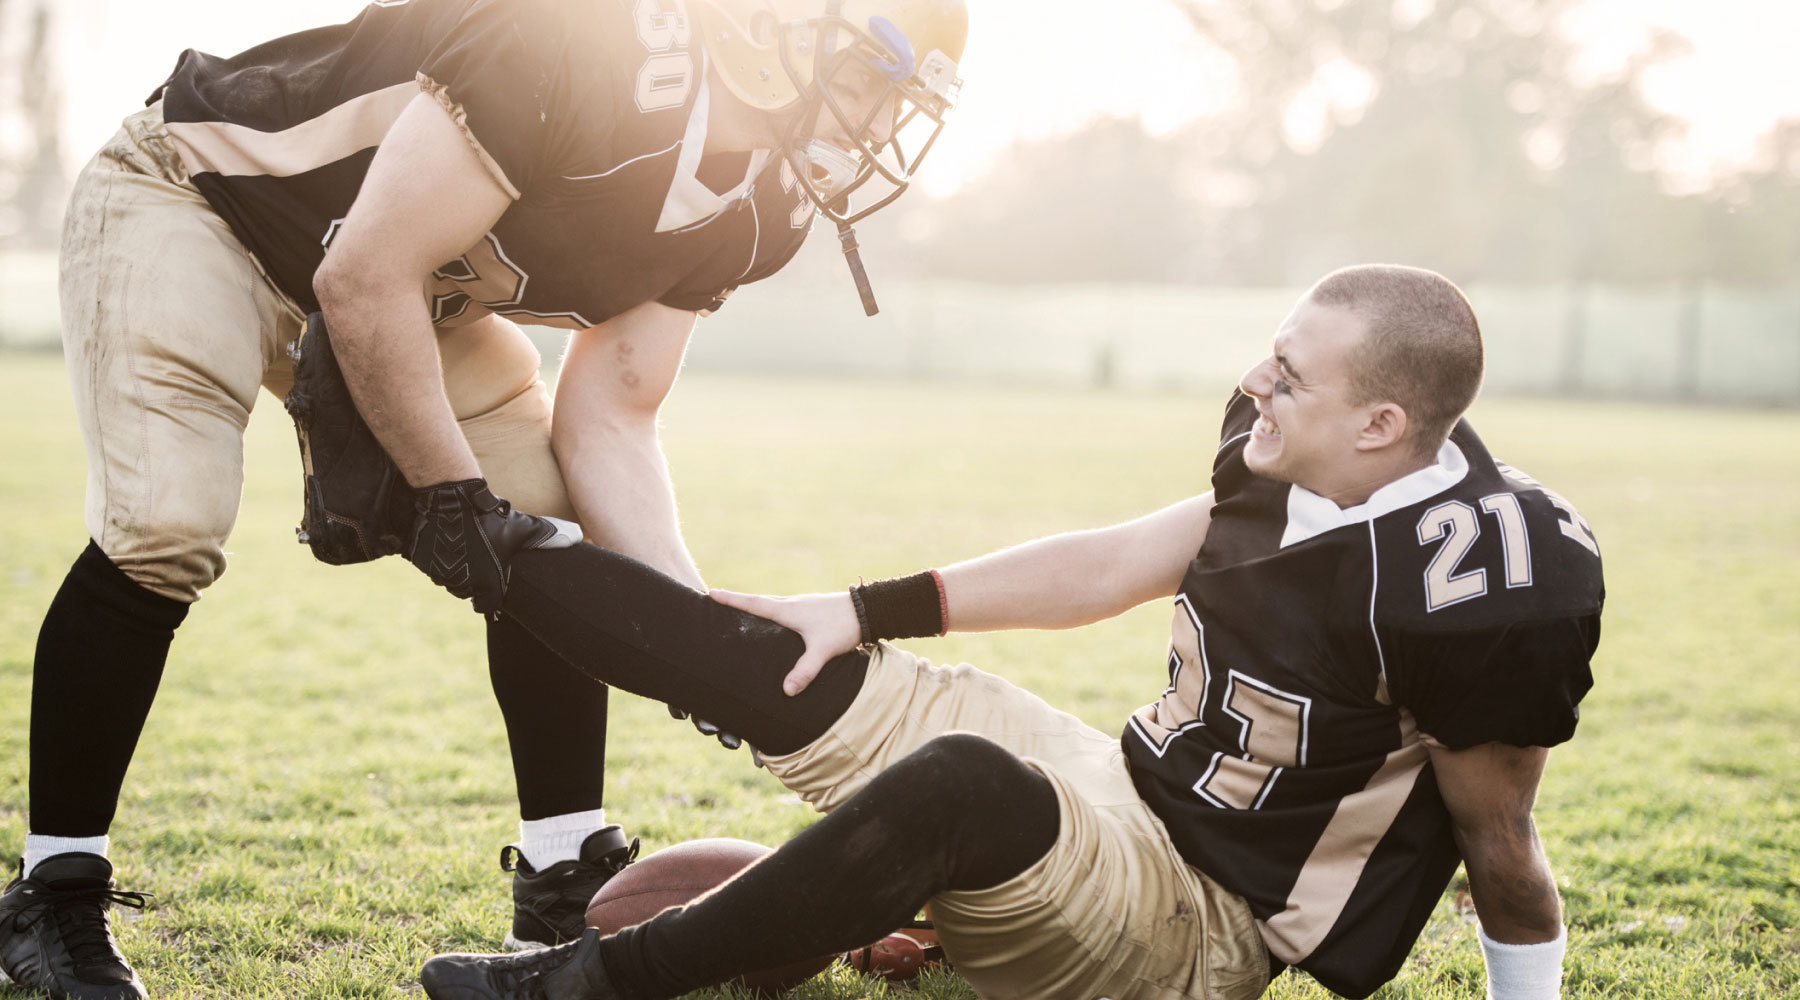 Dealing with common football injuries and getting treatment